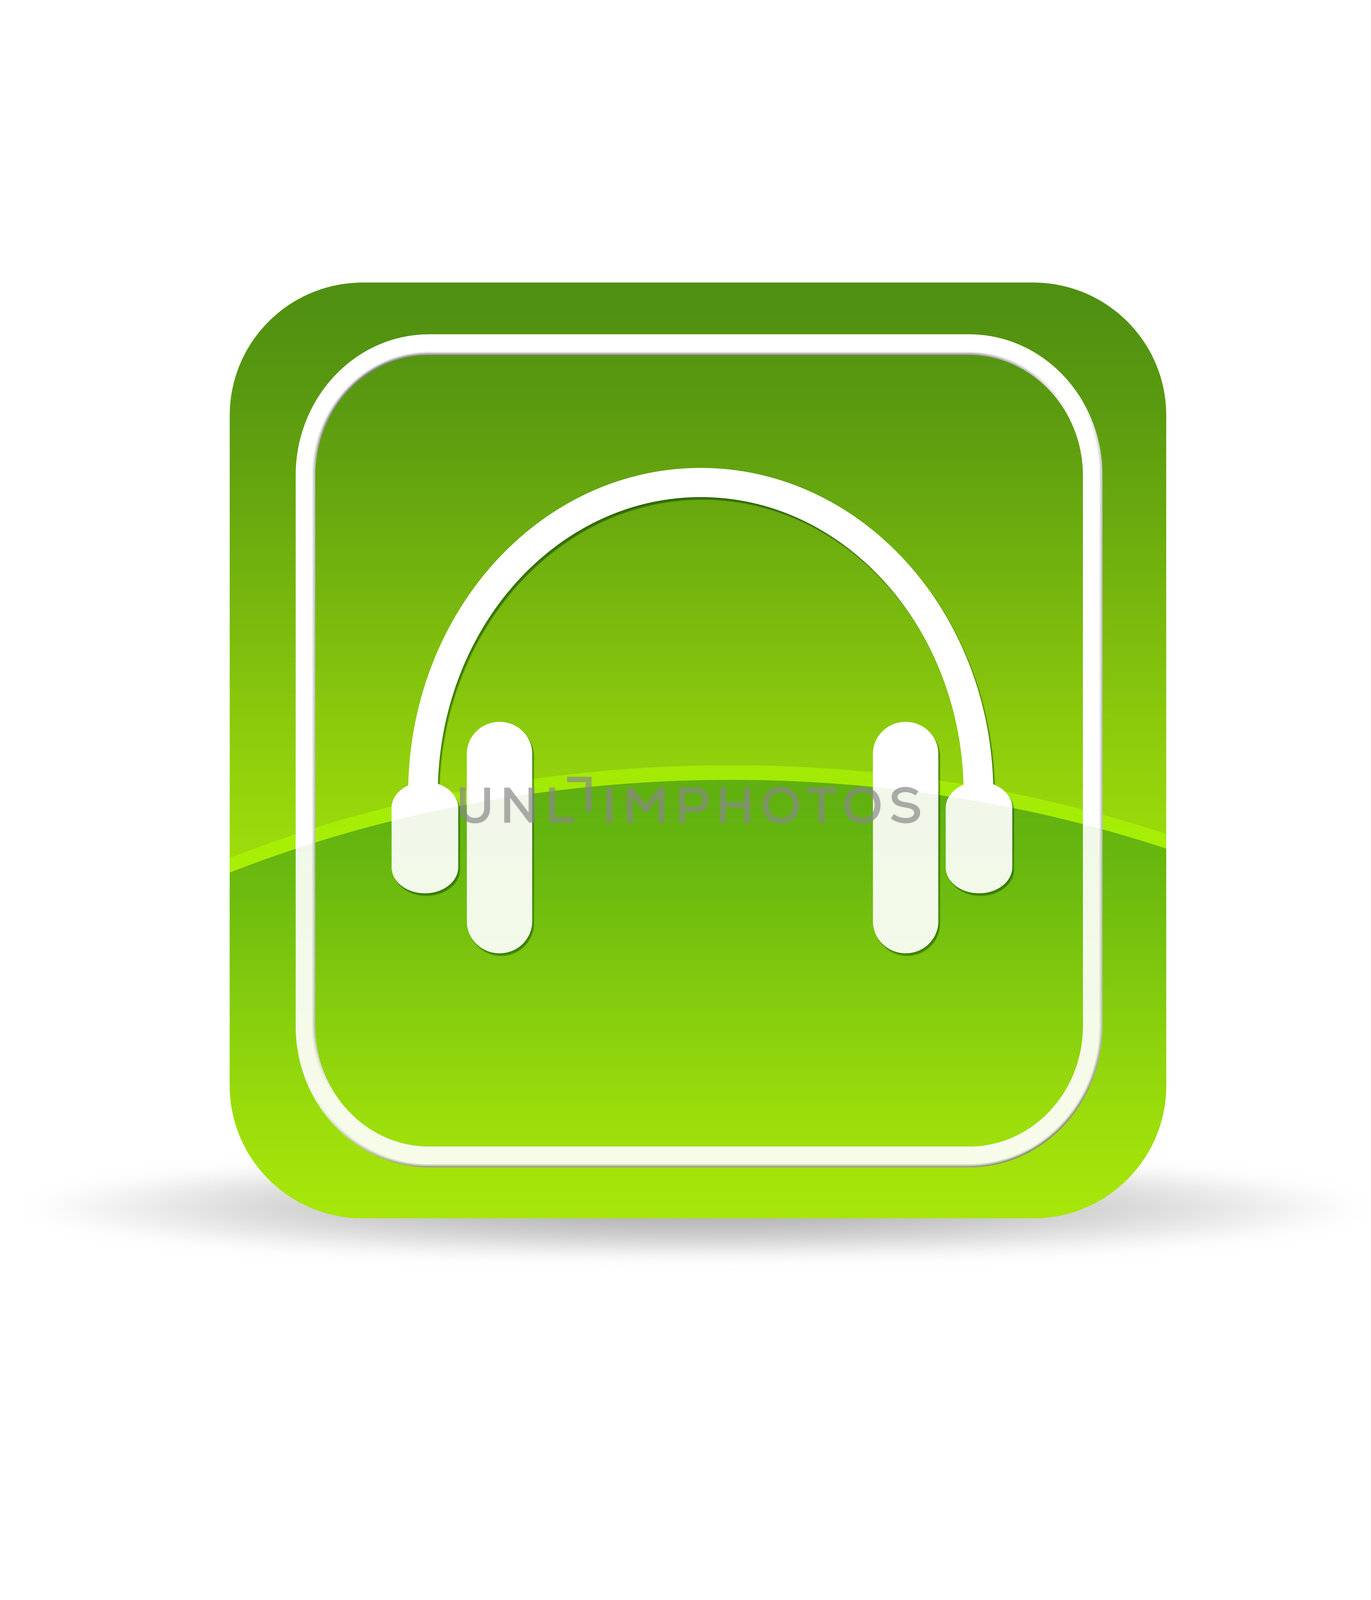 High resolution green headphones icon on white background.